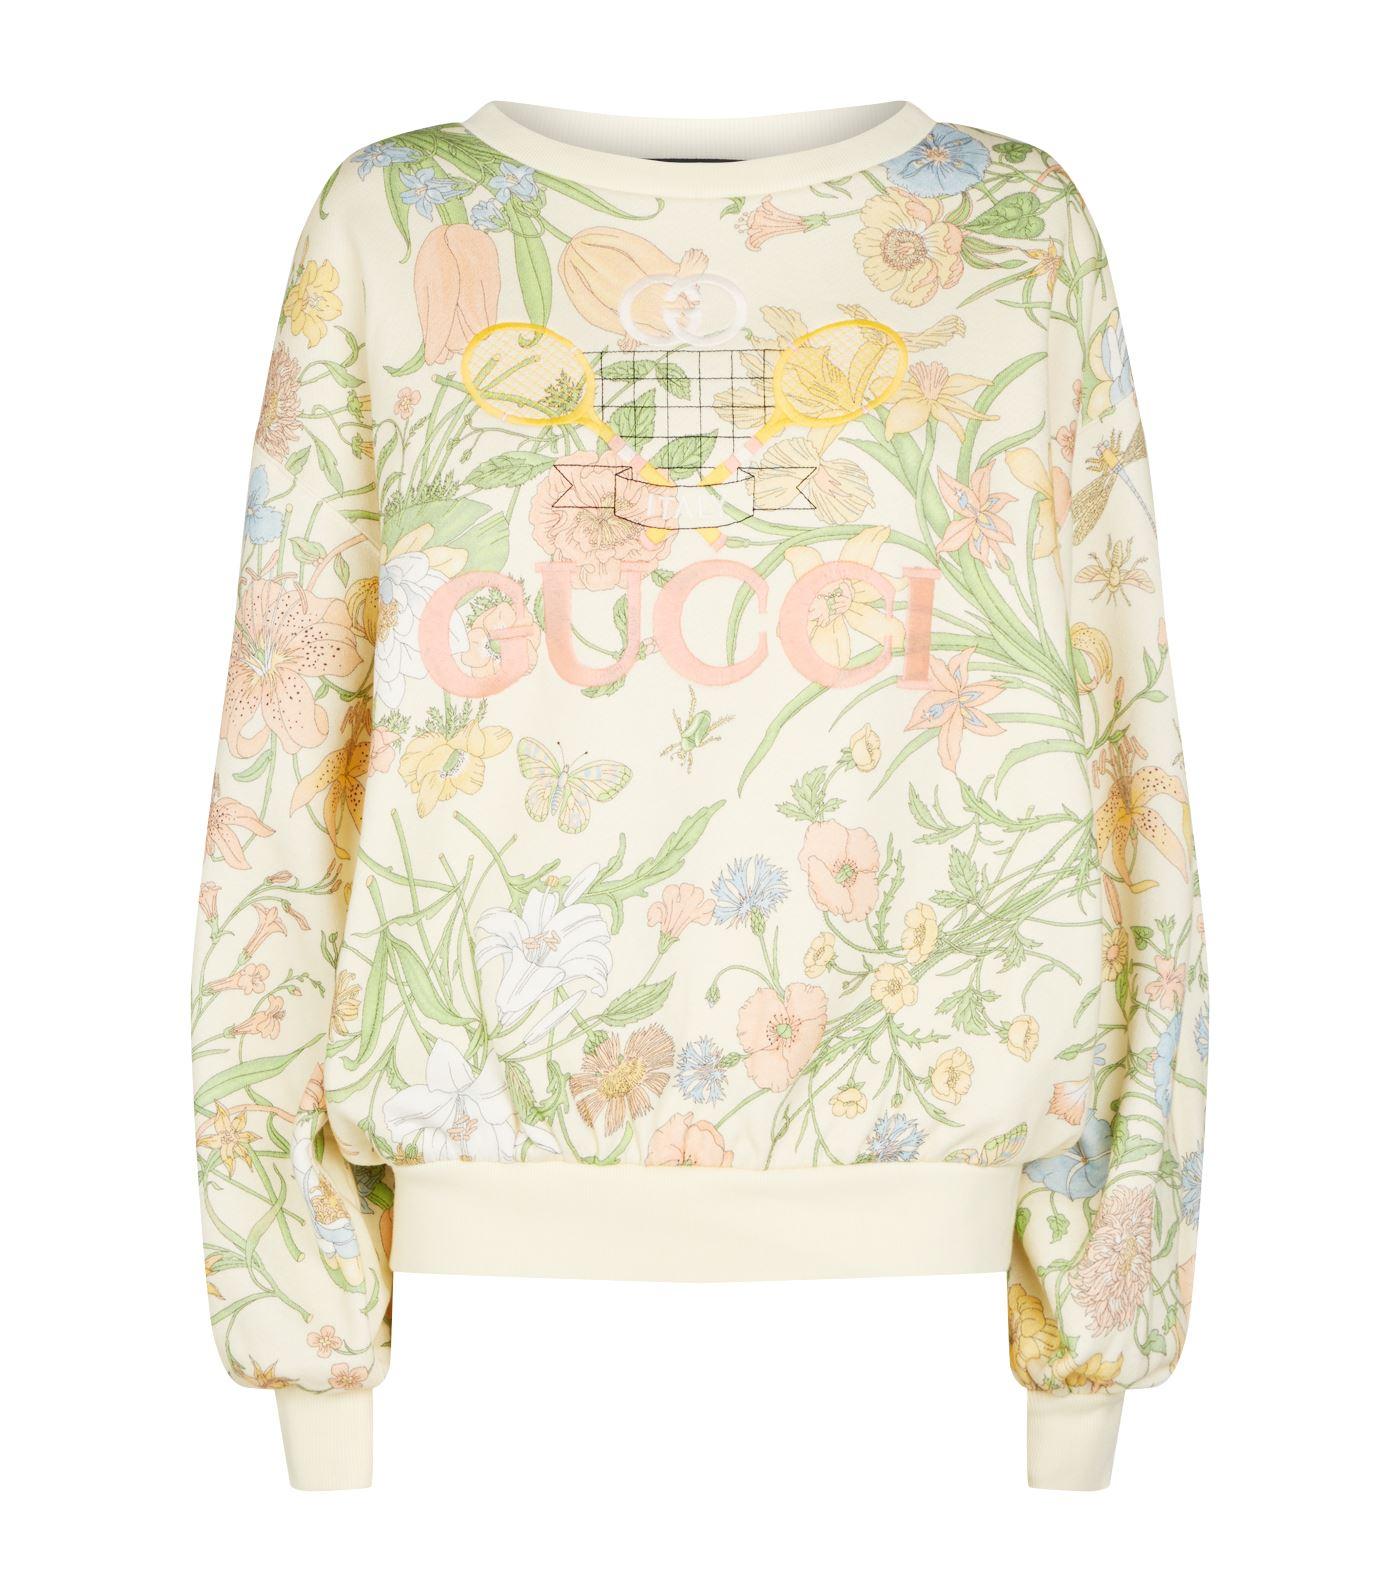 Gucci Floral Print Sweater in White | Lyst